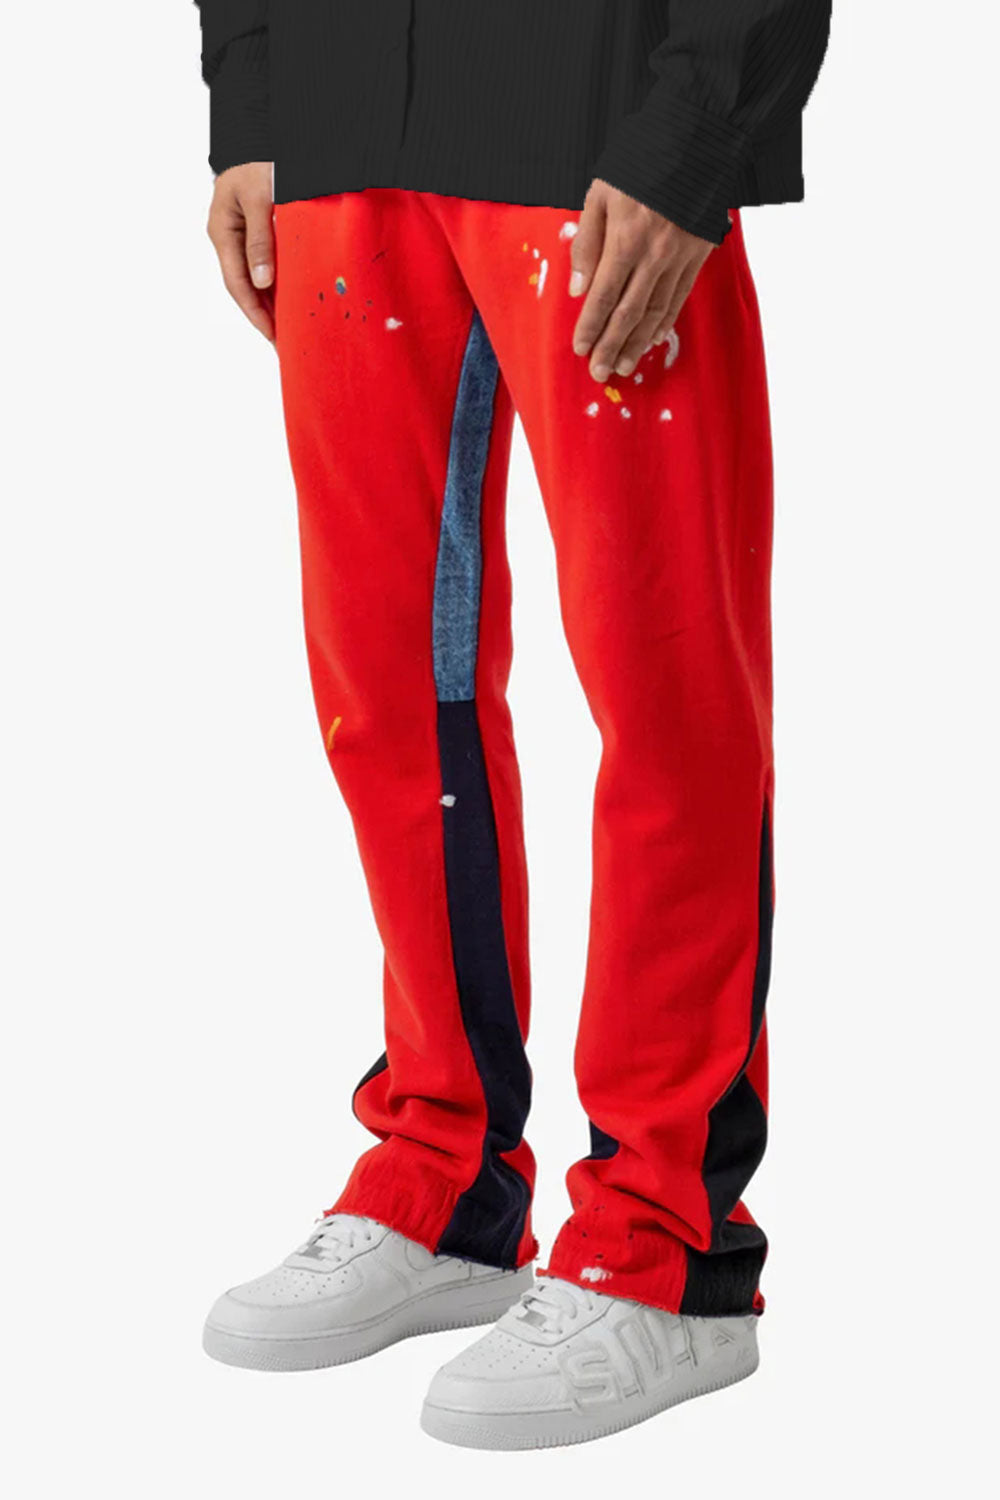 Gingtto Men\'s Red Flare Pants For Sale – GINGTTO